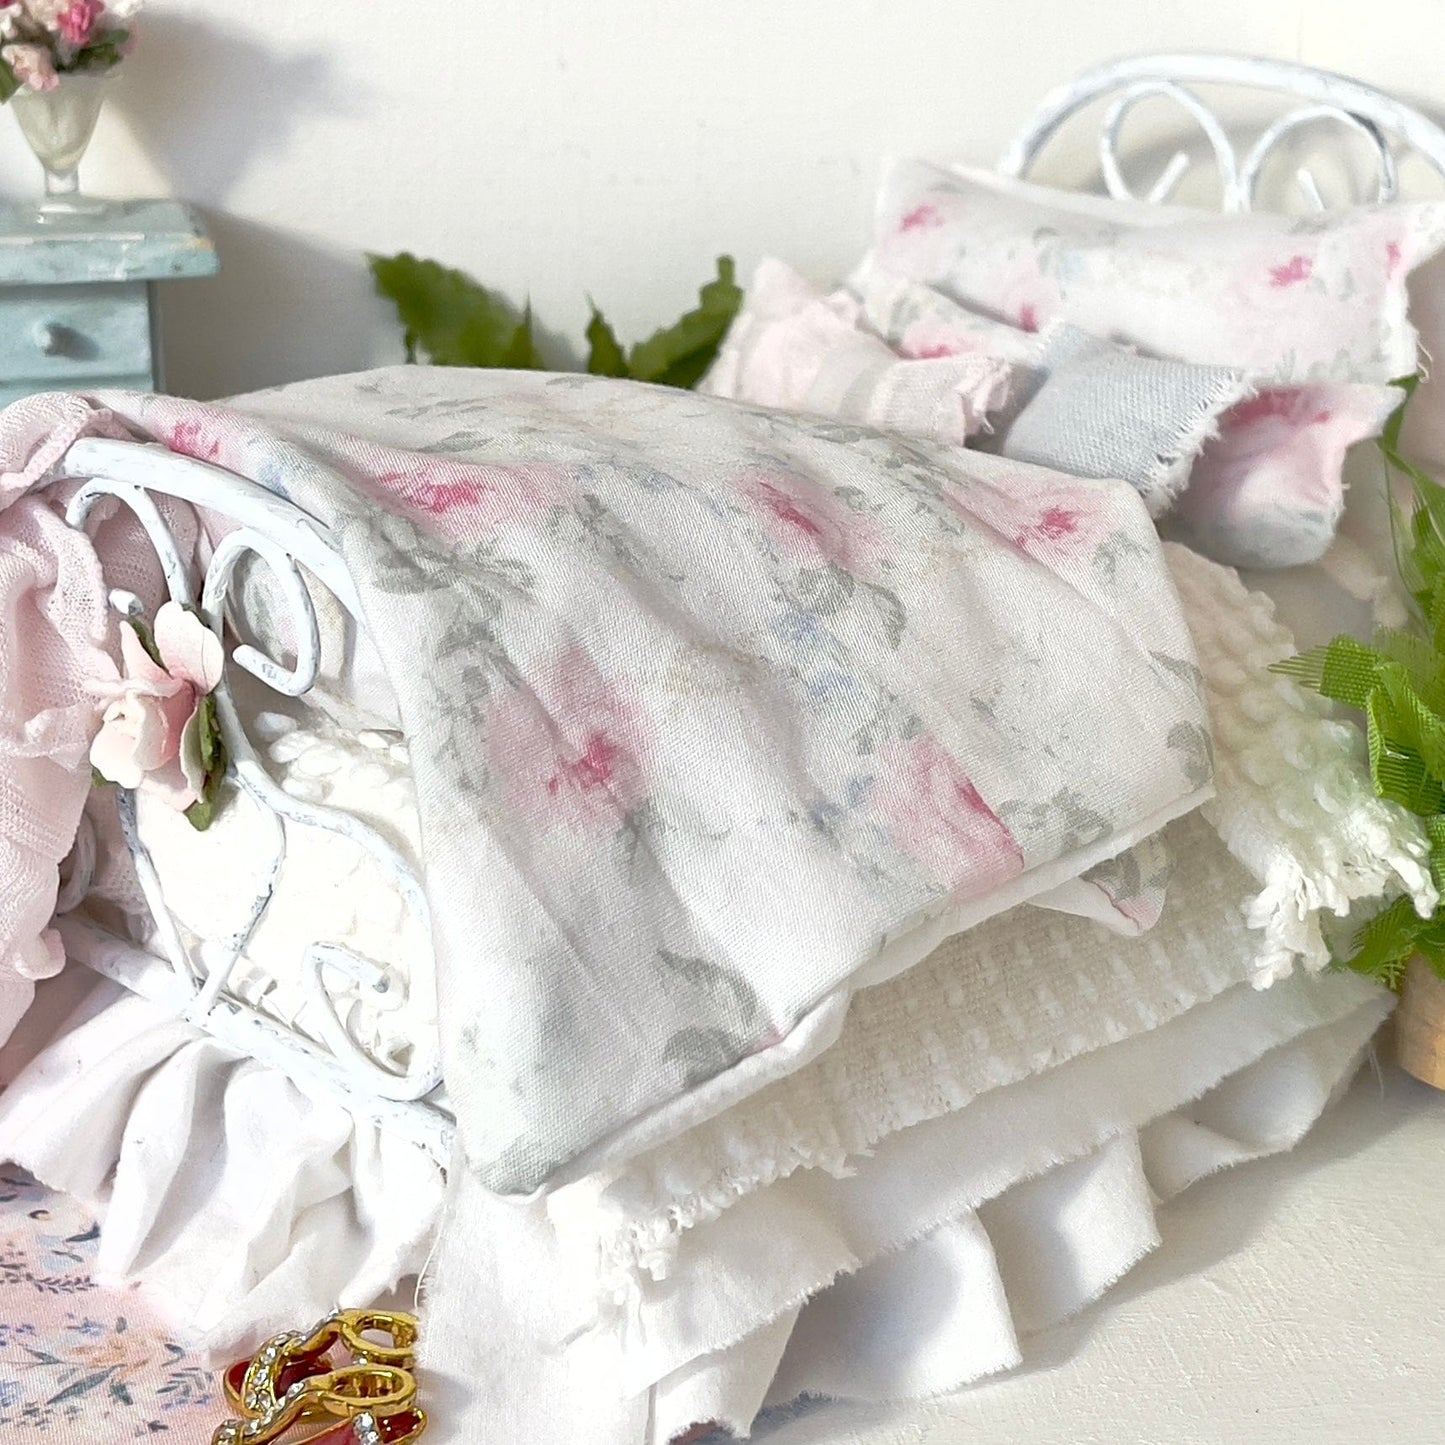 Chantallena Doll House dressed bed Dressed Bed | Shabby Cotton with Pink Roses and Poly Pink Ruffled Bedspread  | Theodora